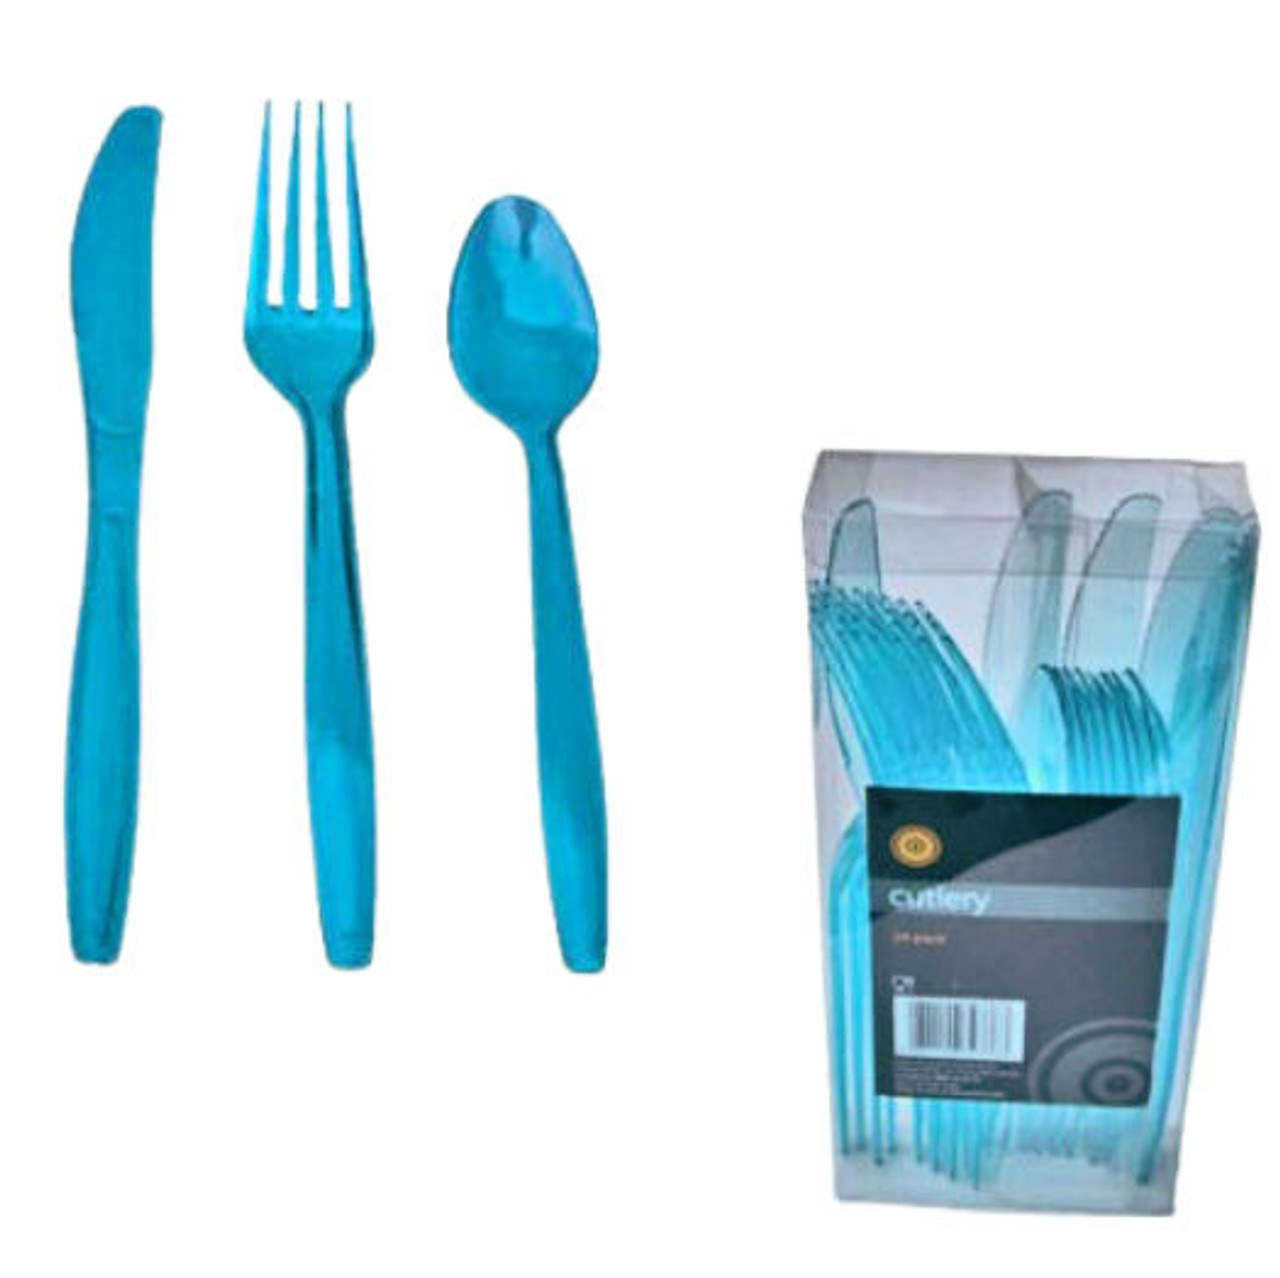 Case of 24 Re-usable Aqua plastic Cutlery 8 Knives - 8 Forks - 8 Desert Spoons